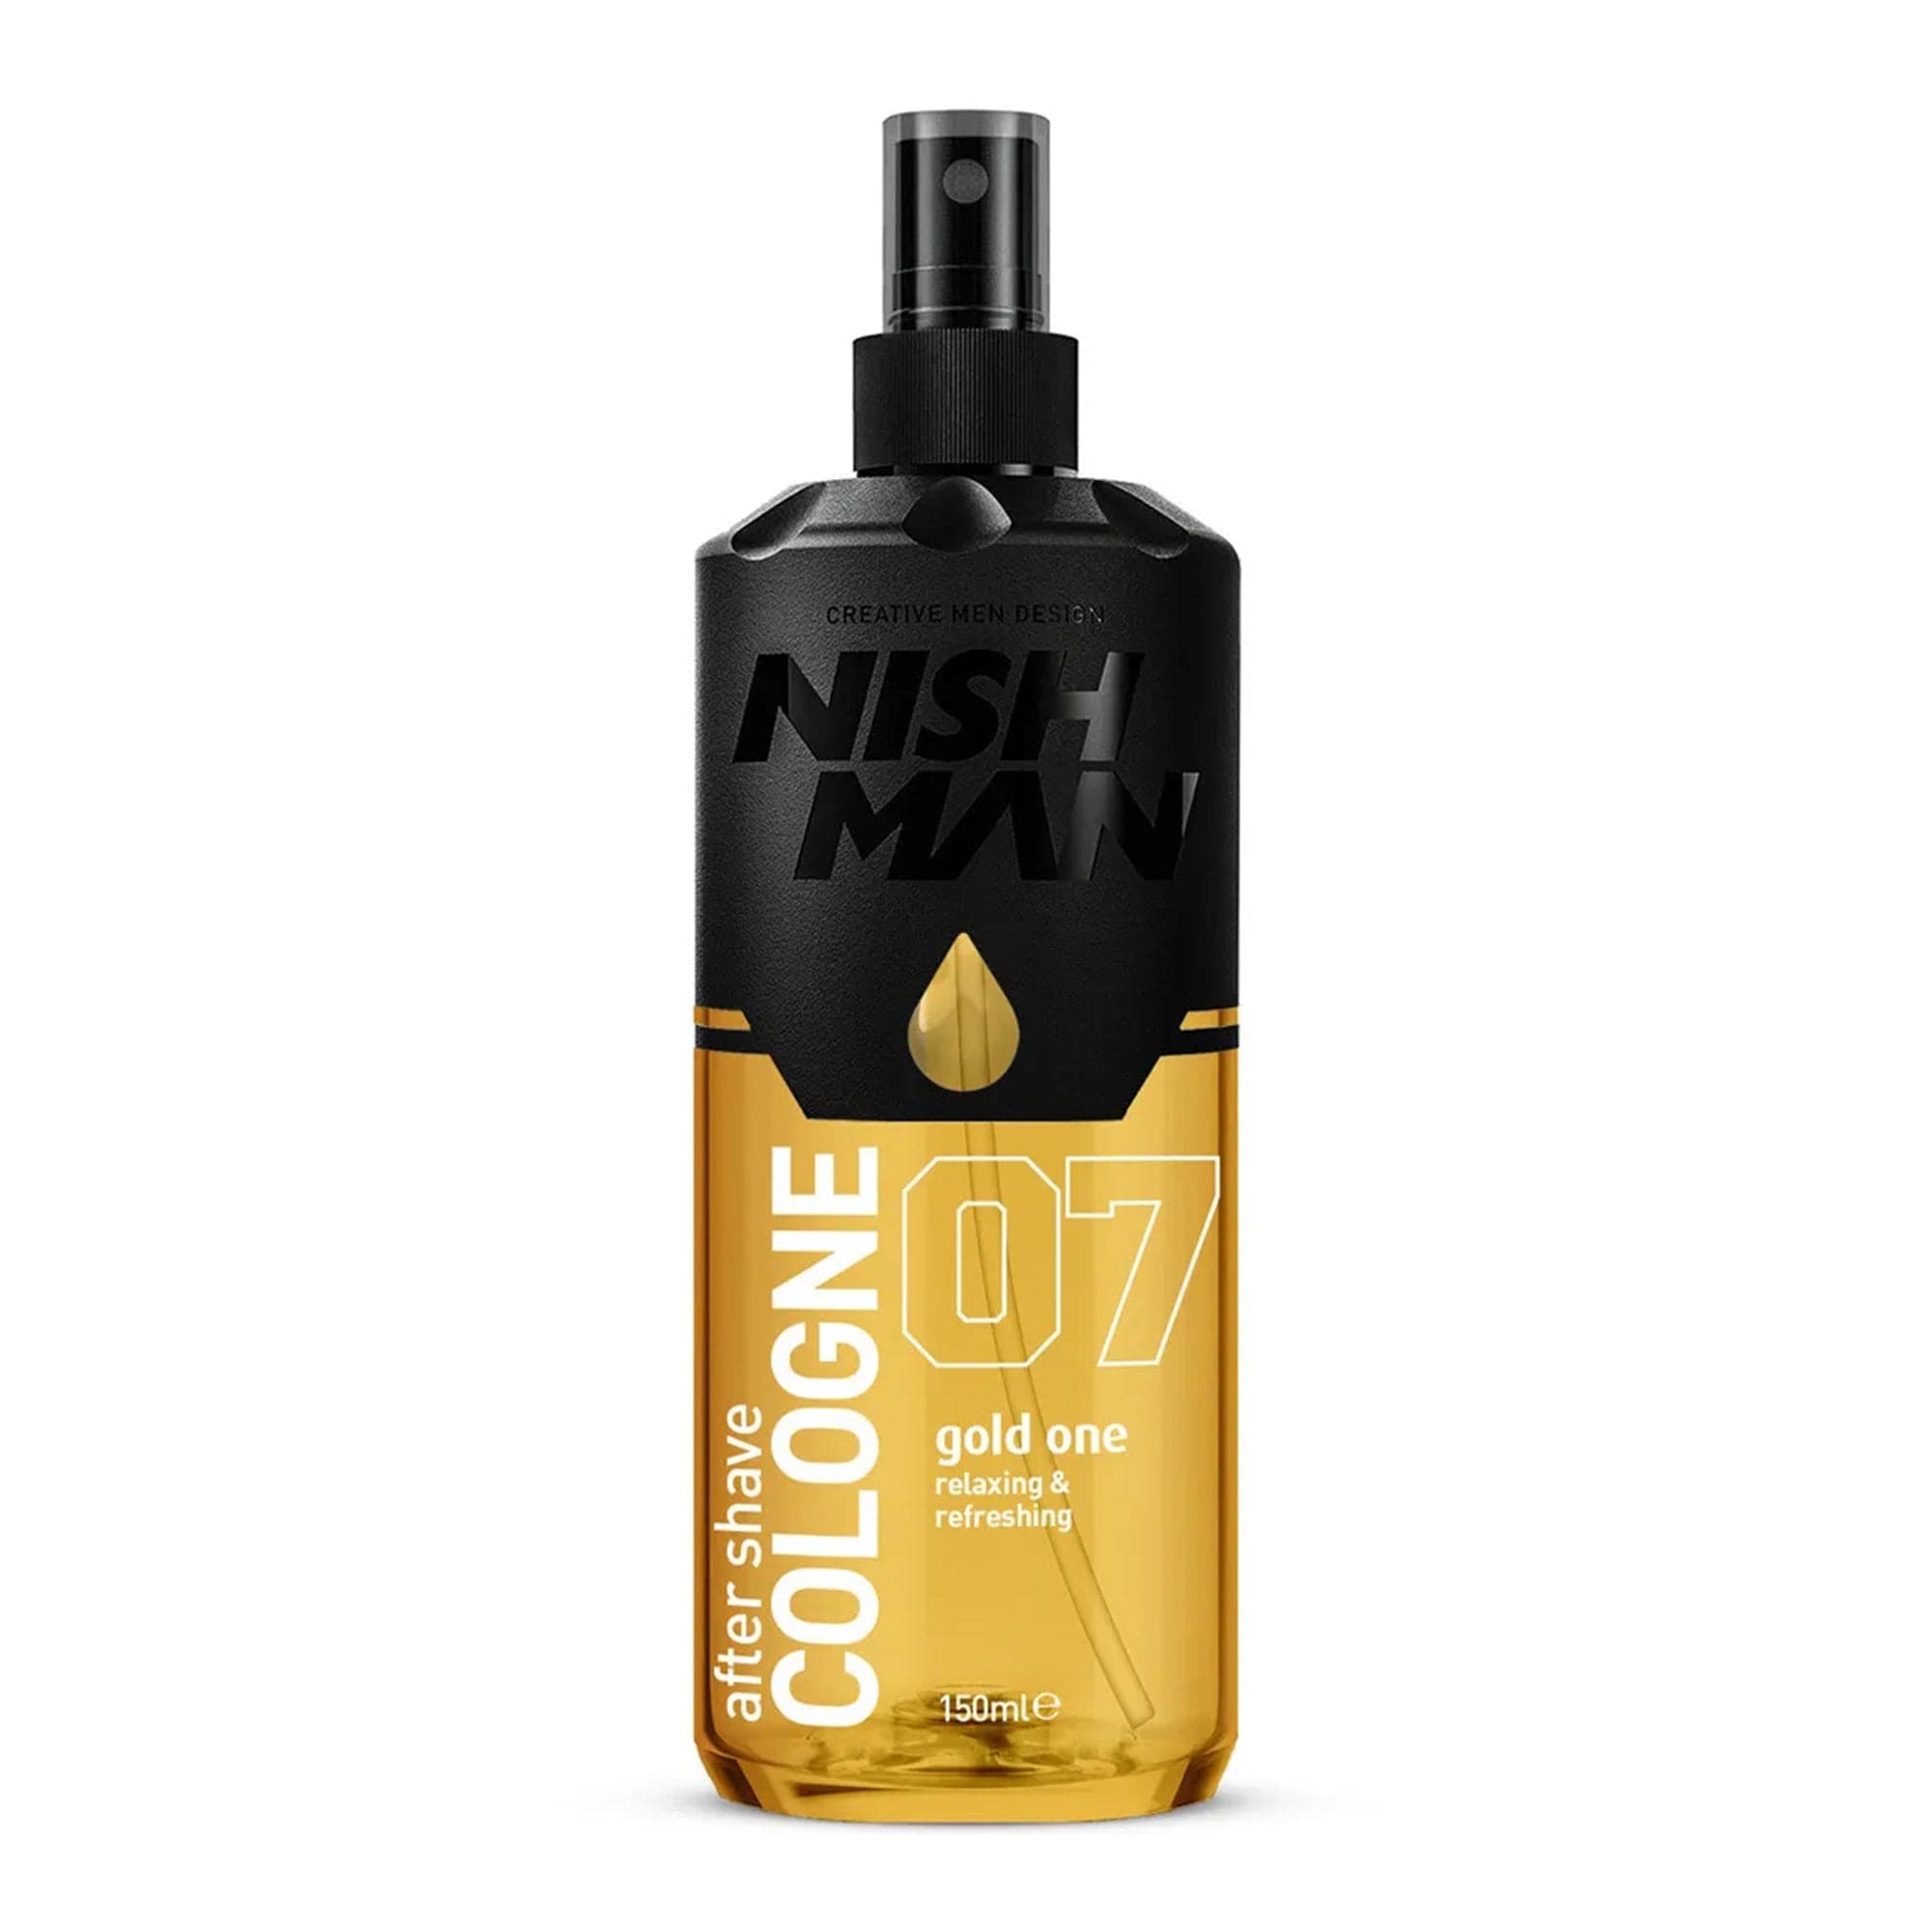 Nishman - After Shave Cologne No.07 Gold One 150ml